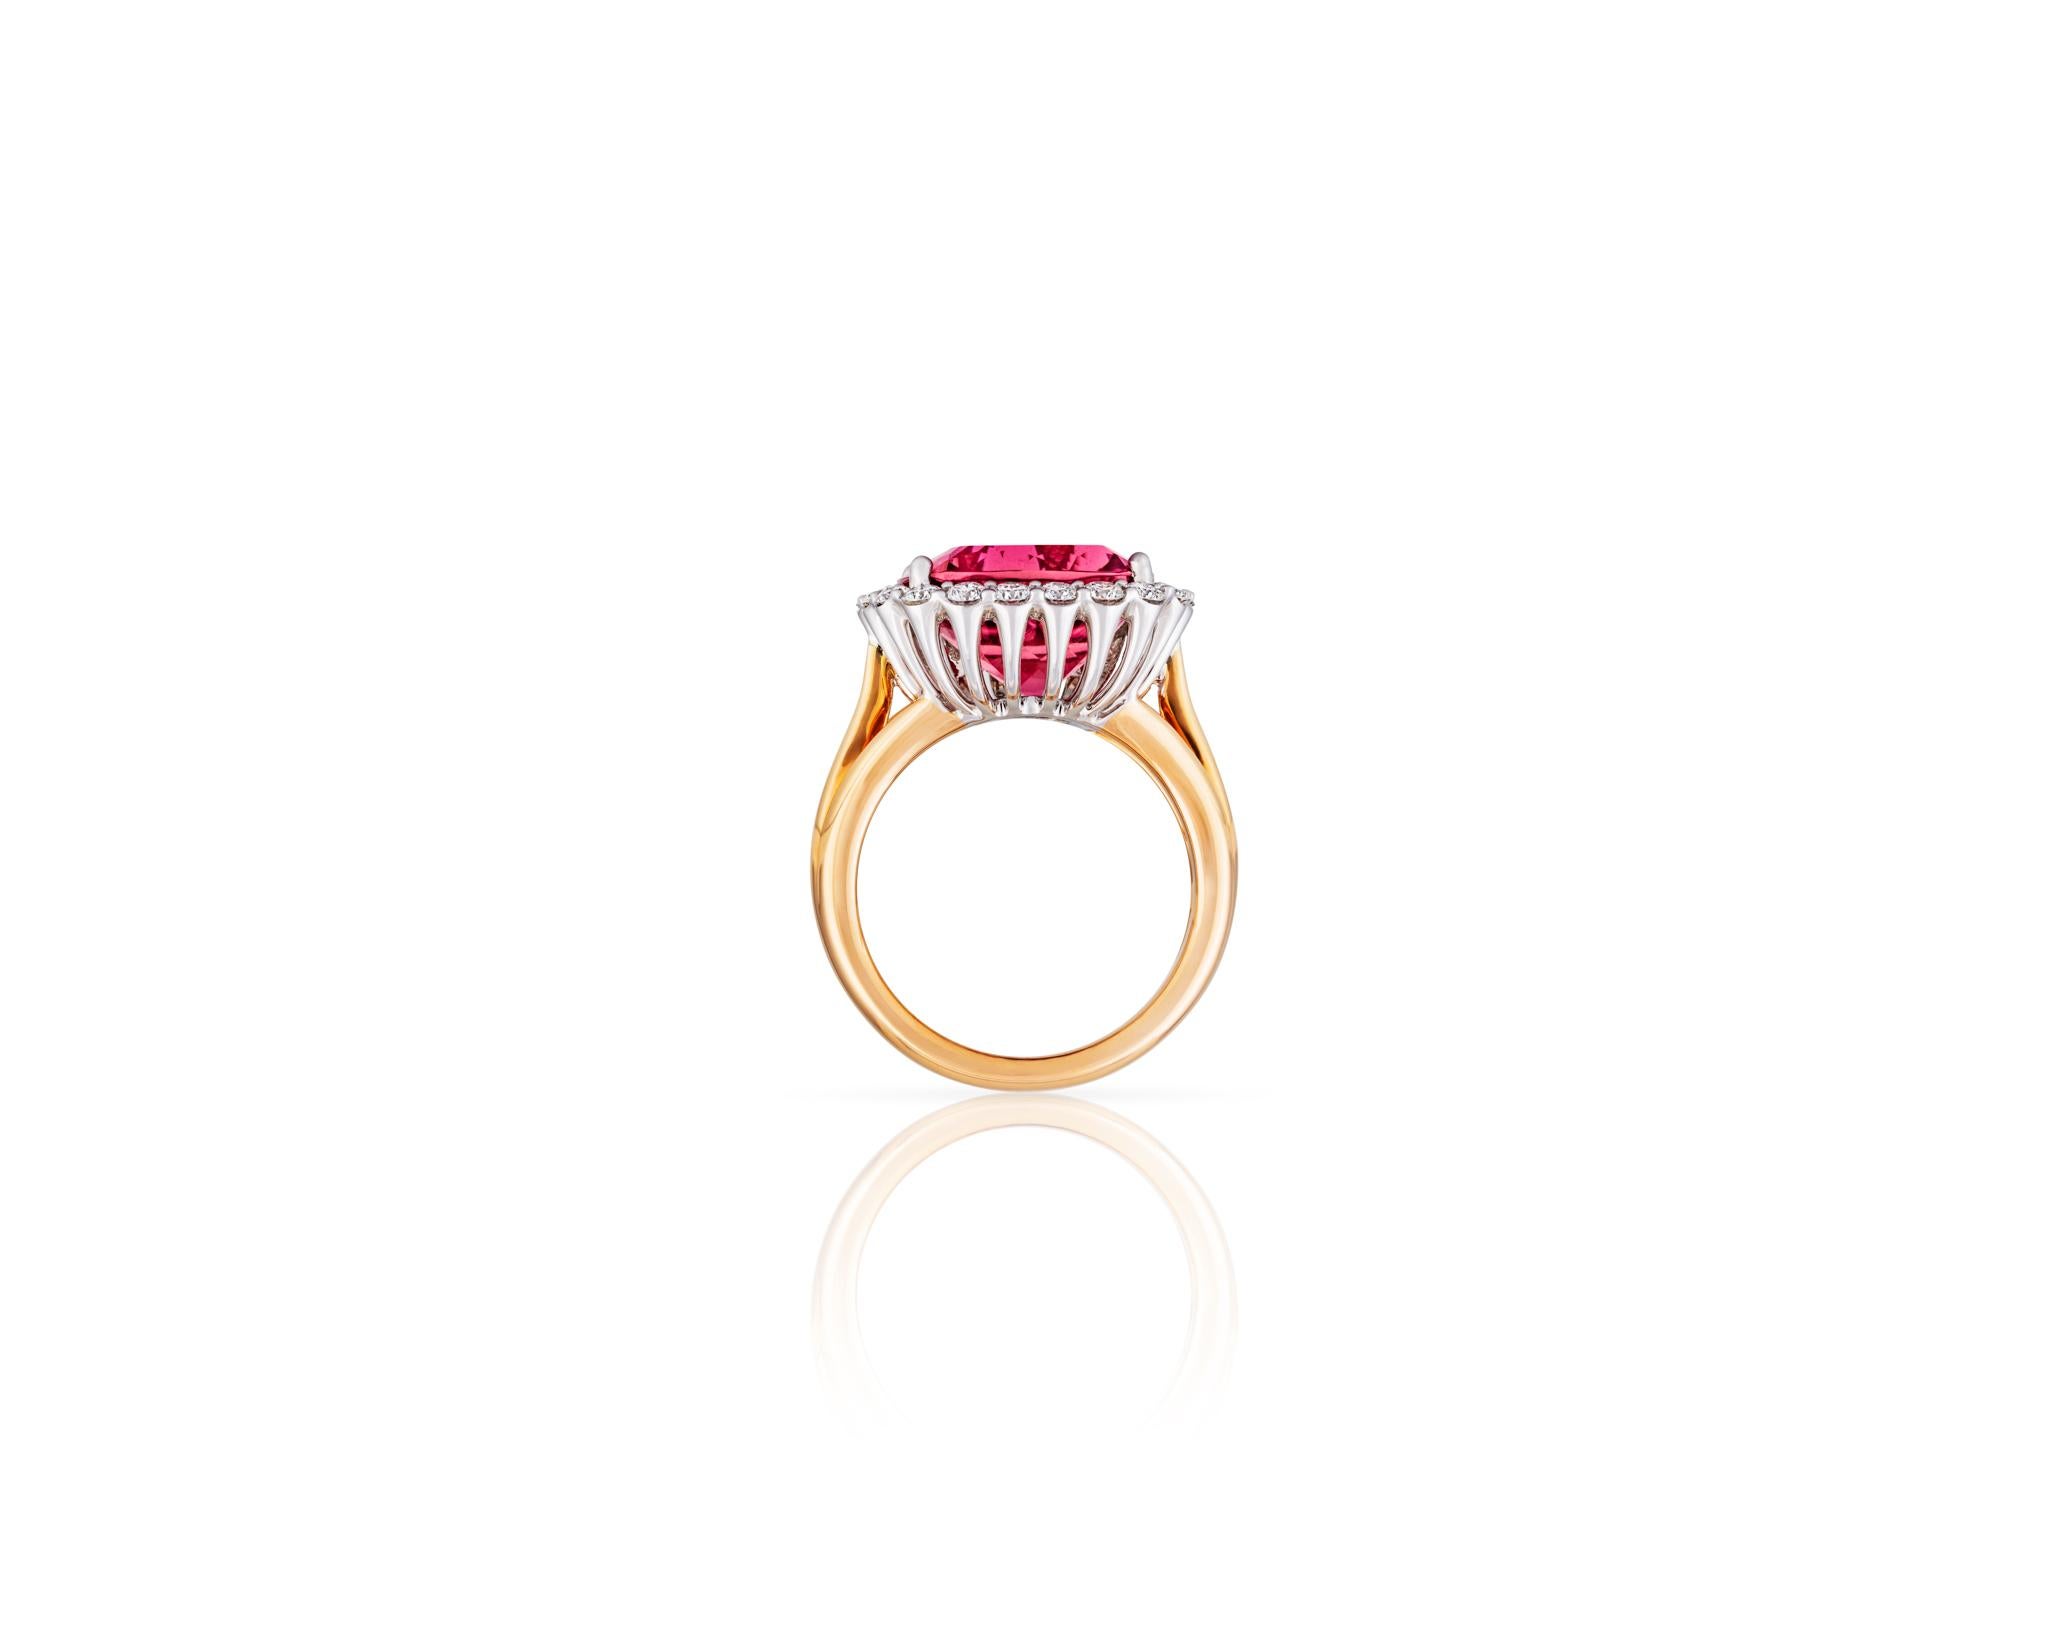 Contemporary 8.3ct Cushion Cut Pink Tourmaline .84ct Diamond 14kt Yellow Gold Ring For Sale